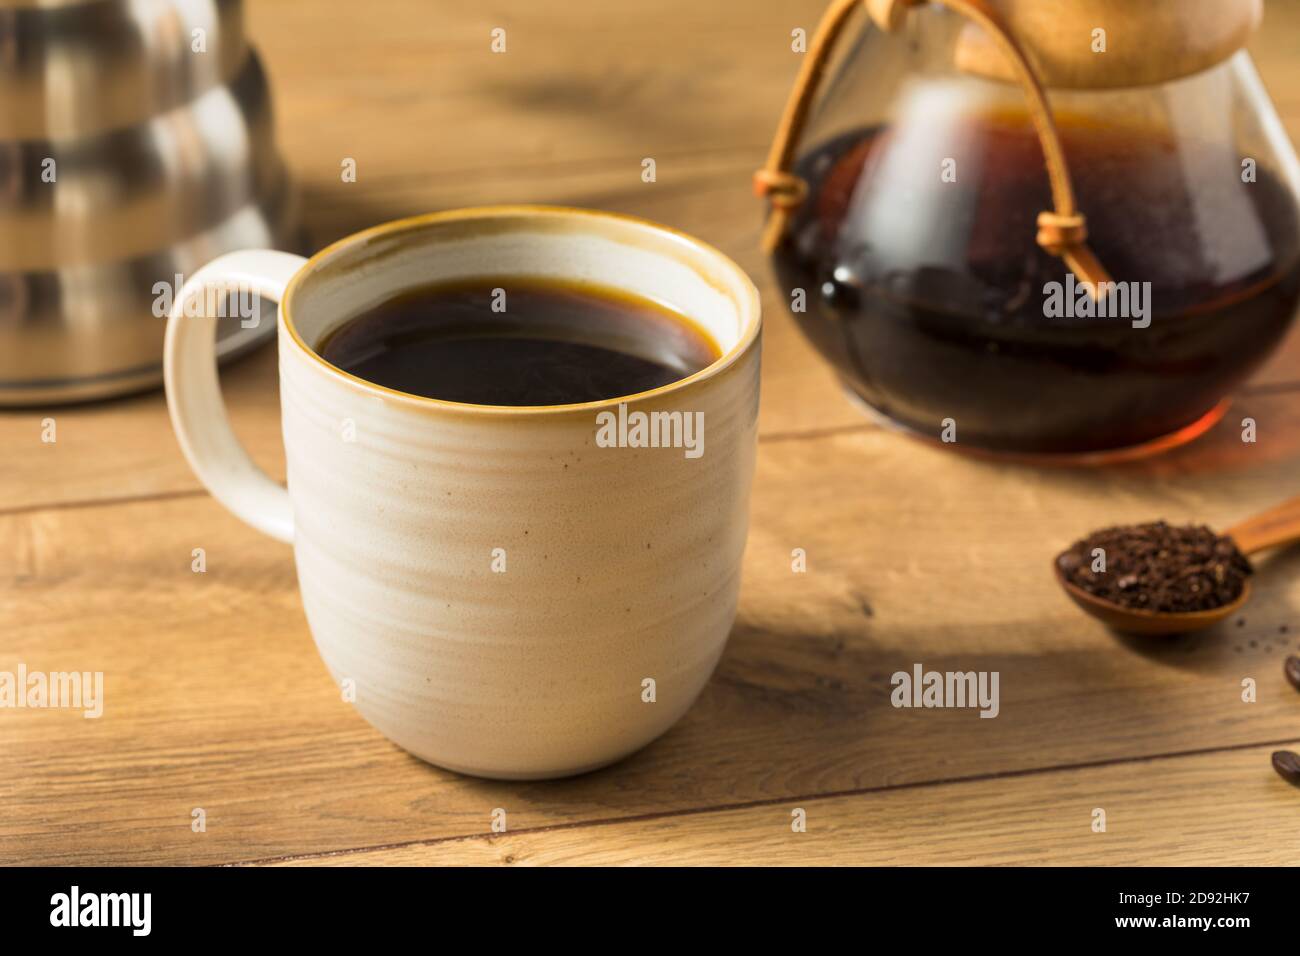 Homemade Pour Over Coffee Ready to Drink Stock Photo